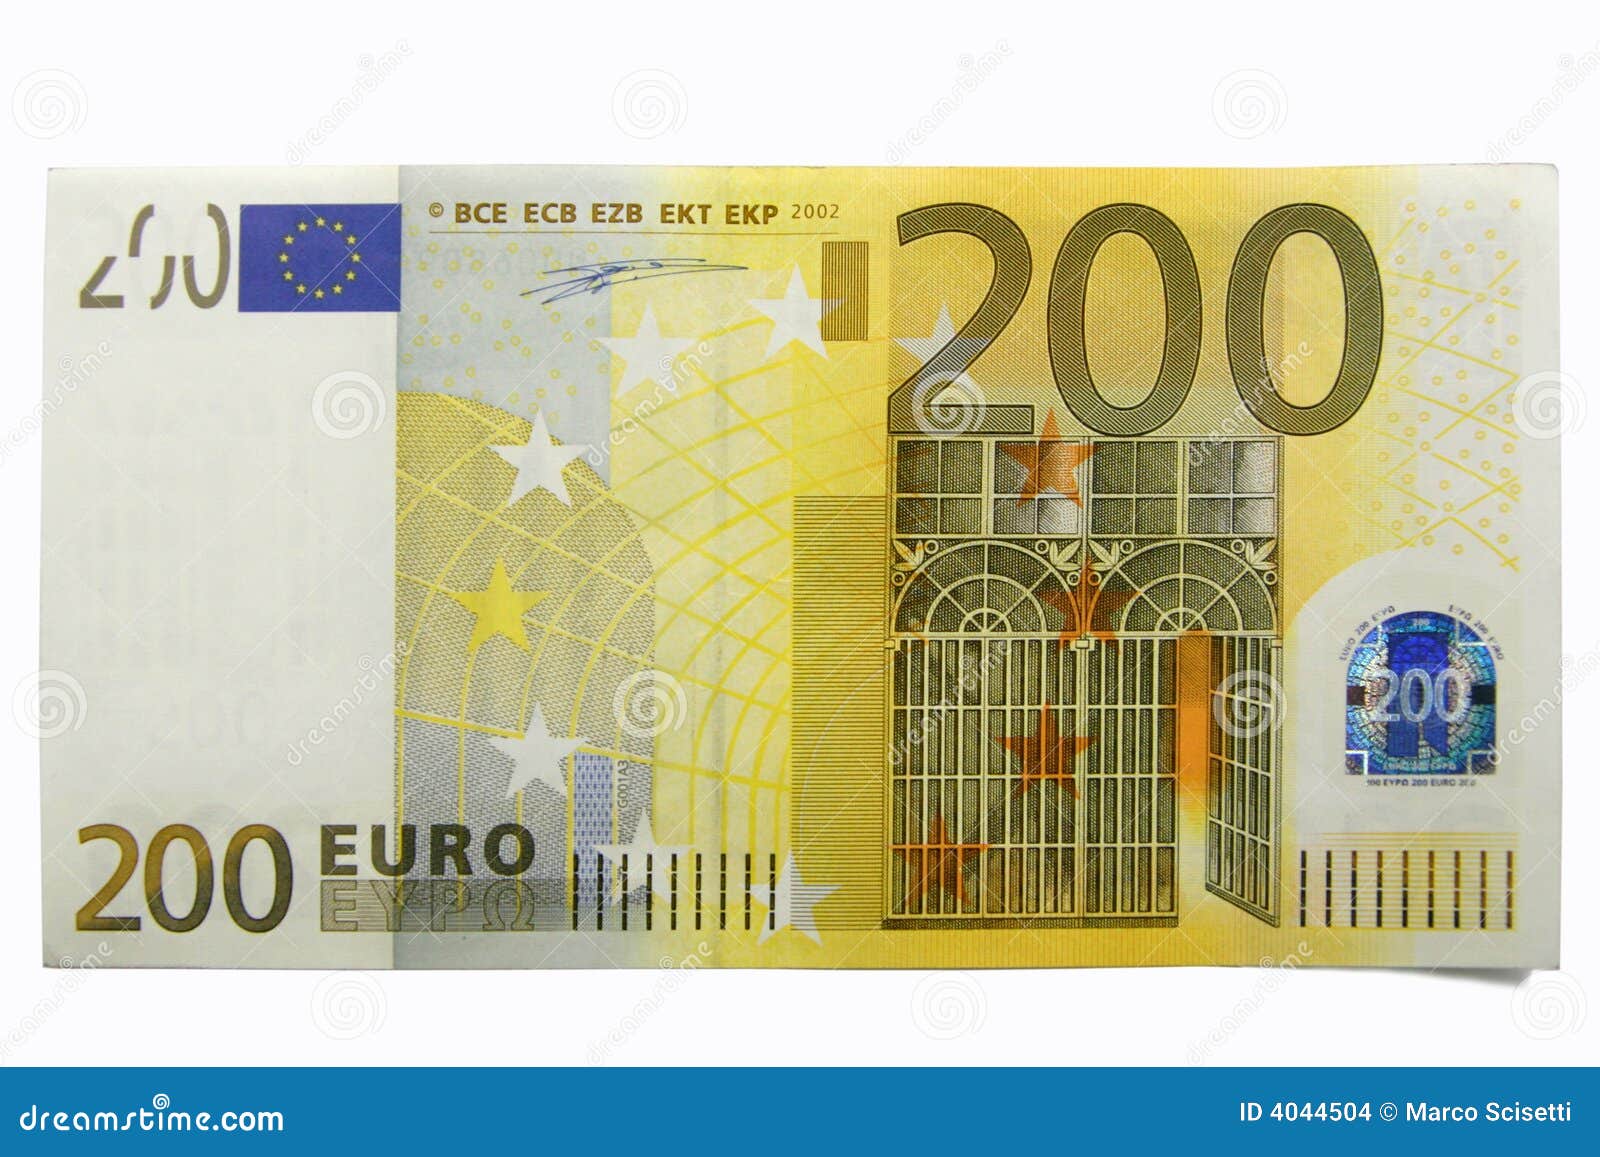 200 euro, two hundred